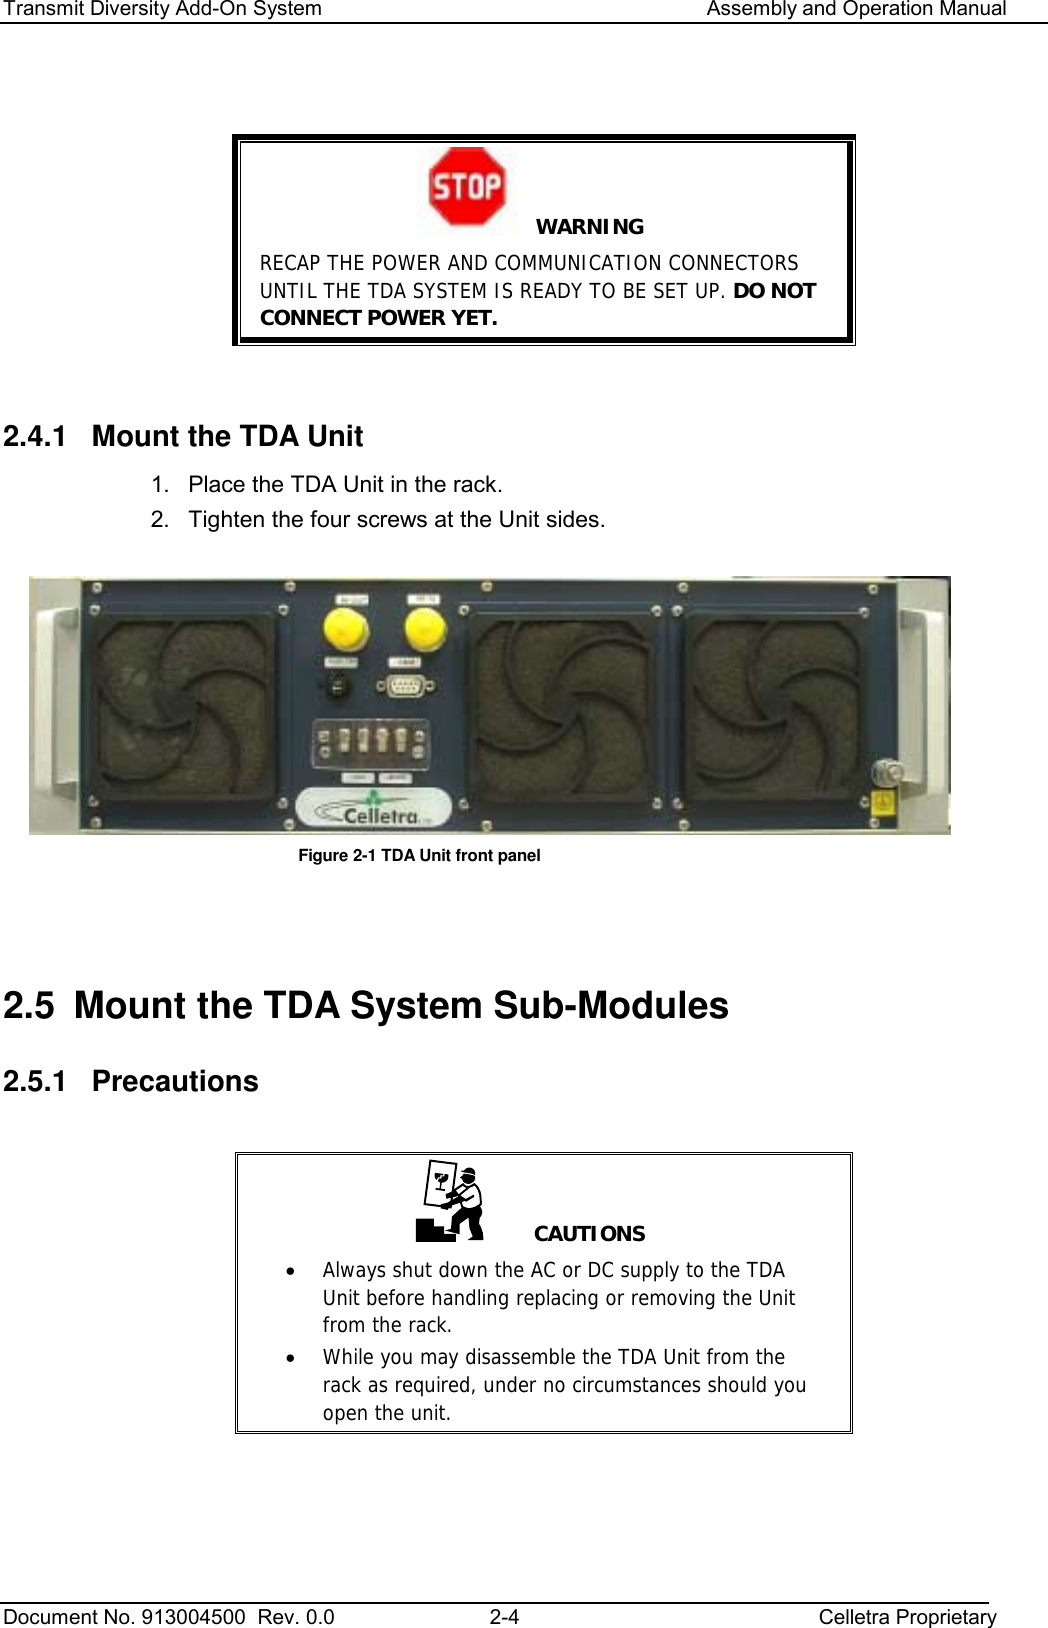 Transmit Diversity Add-On System   Assembly and Operation Manual  Document No. 913004500  Rev. 0.0  2-4  Celletra Proprietary    WARNING RECAP THE POWER AND COMMUNICATION CONNECTORS UNTIL THE TDA SYSTEM IS READY TO BE SET UP. DO NOT CONNECT POWER YET.  2.4.1  Mount the TDA Unit 1.  Place the TDA Unit in the rack.  2.  Tighten the four screws at the Unit sides.   Figure  2-1 TDA Unit front panel   2.5  Mount the TDA System Sub-Modules 2.5.1 Precautions      CAUTIONS •  Always shut down the AC or DC supply to the TDA Unit before handling replacing or removing the Unit from the rack. •  While you may disassemble the TDA Unit from the rack as required, under no circumstances should you open the unit.    